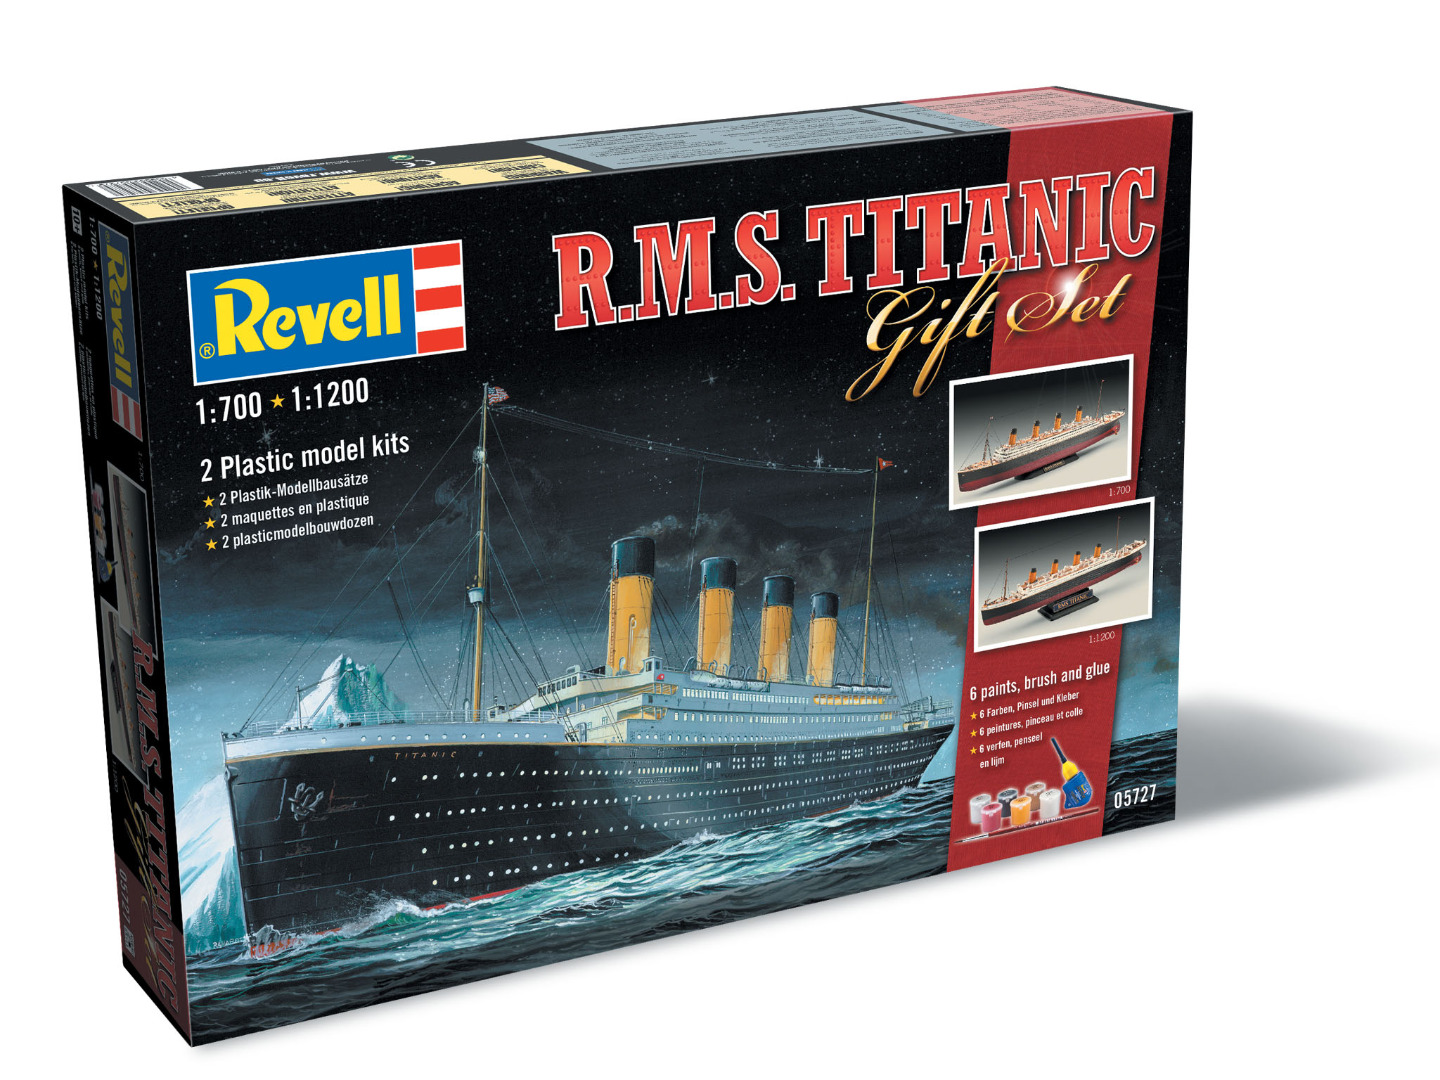 Revell Gift Set R.M.S. Titanic Scale 1:700 / 1:1200